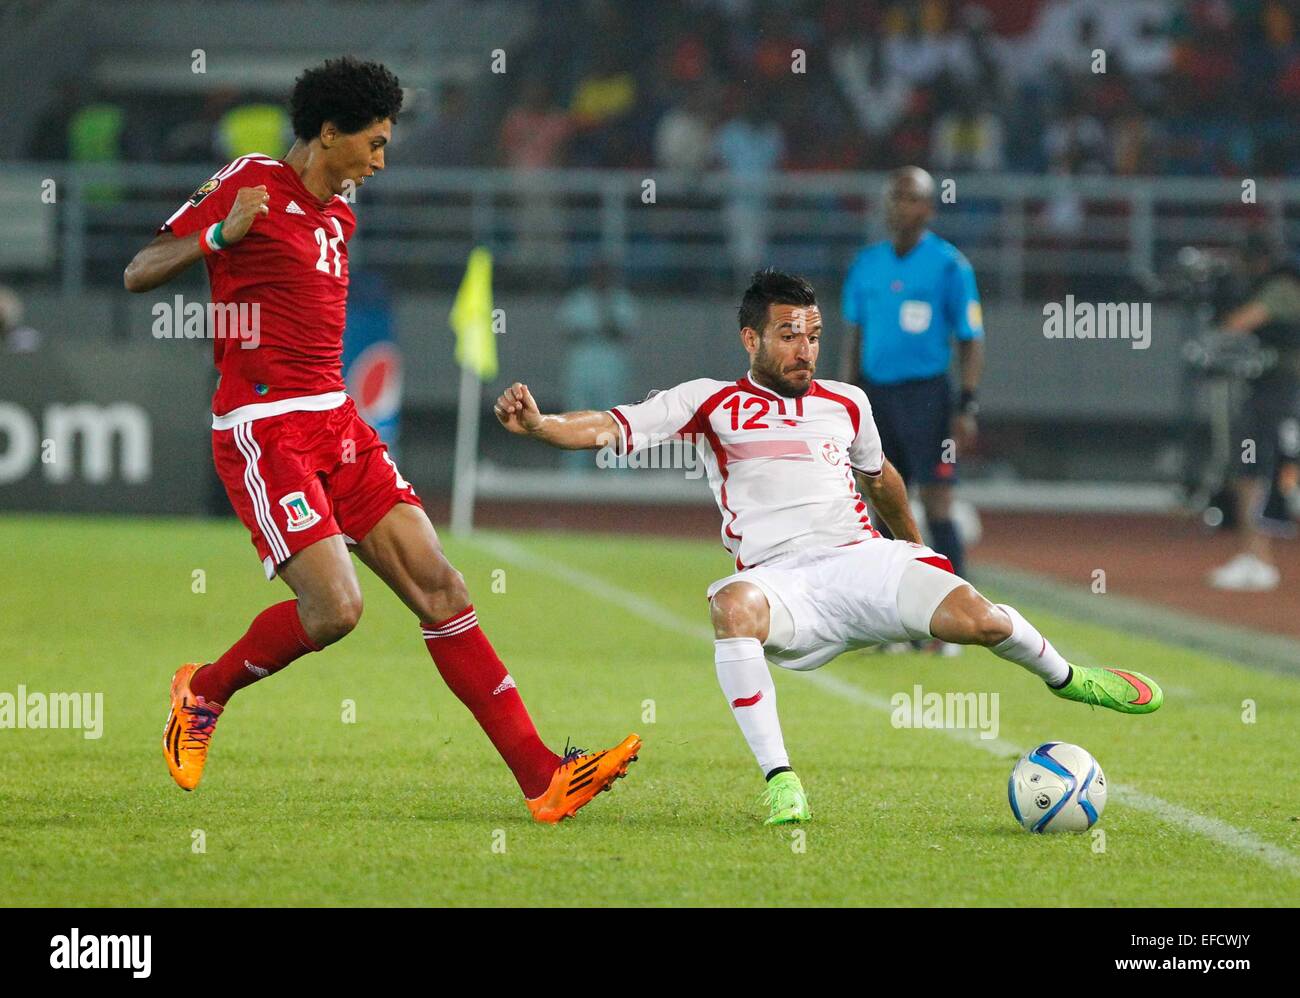 Bata, Equatorial Guinea. 31st Jan, 2015. Ali Maaloul (R) of Tunisia vies for the ball during a quarterfinal match of Africa Cup of Nations between Equatorial Guinea and Tunisia at the Stadium of Bata, Equatorial Guinea, Jan. 31, 2015. Equatorial Guinea won 2-1. Credit:  Li Jing/Xinhua/Alamy Live News Stock Photo